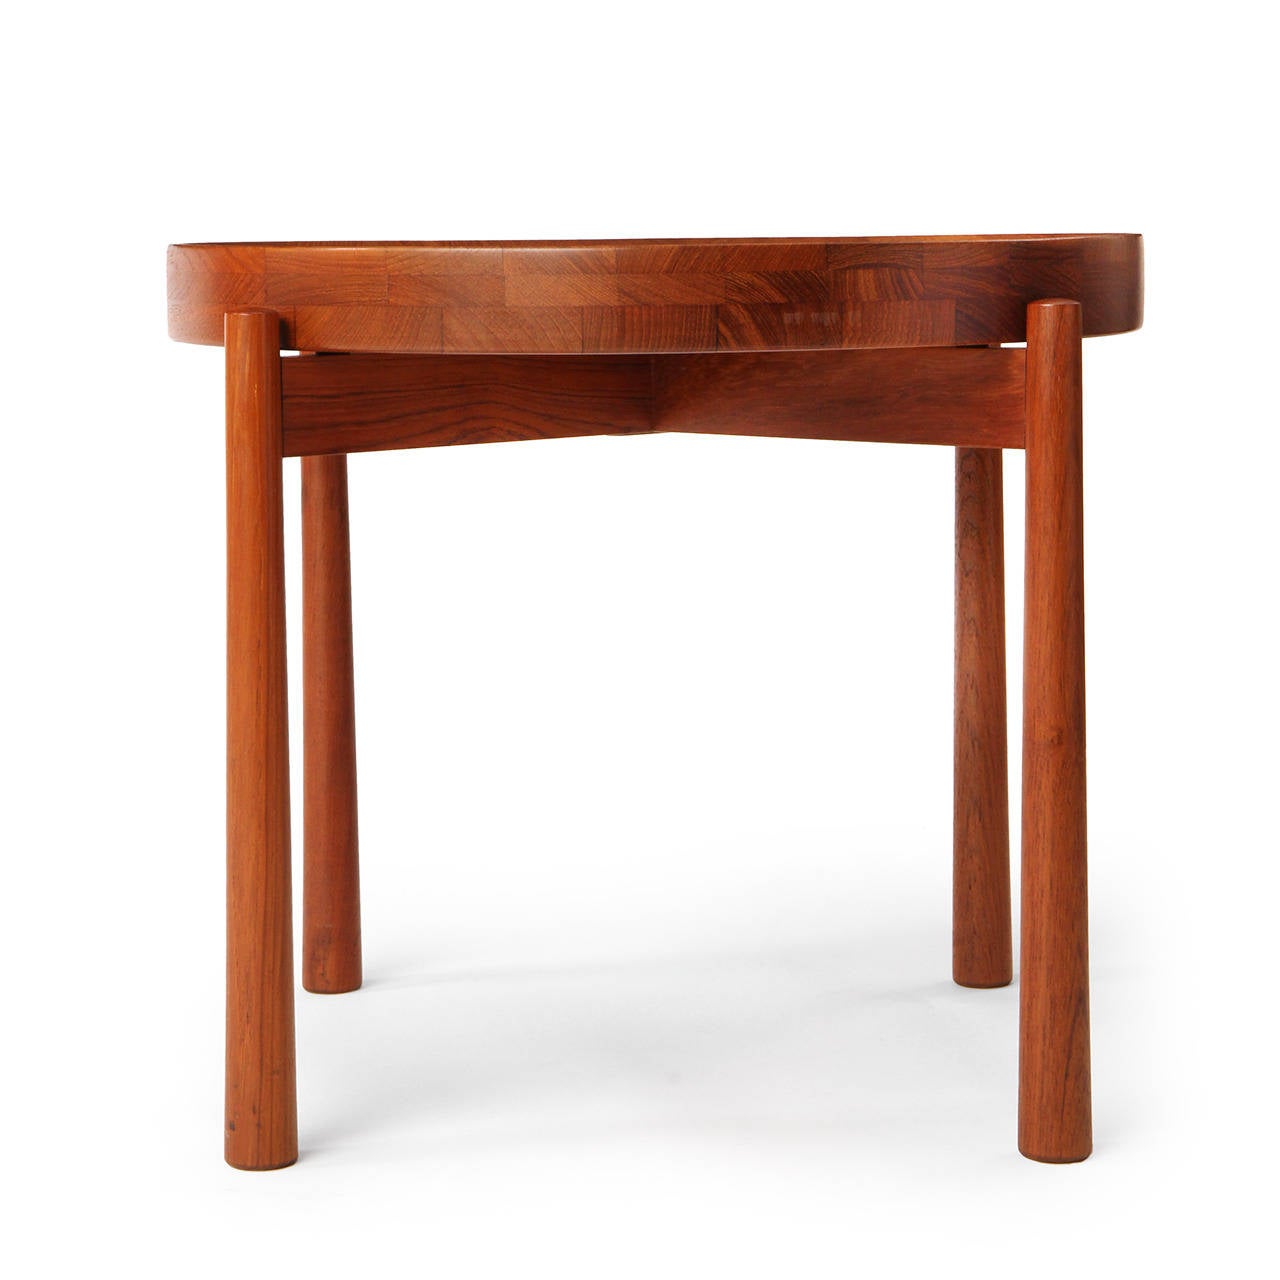 A Scandinavian Modern tray table by Jens Quistgaard in solid teak. The table is finely crafted and has a removable and reversible lathe-turned top that is concave on one side and flat on the other, resting on an x-shaped stretcher and tapered dowel